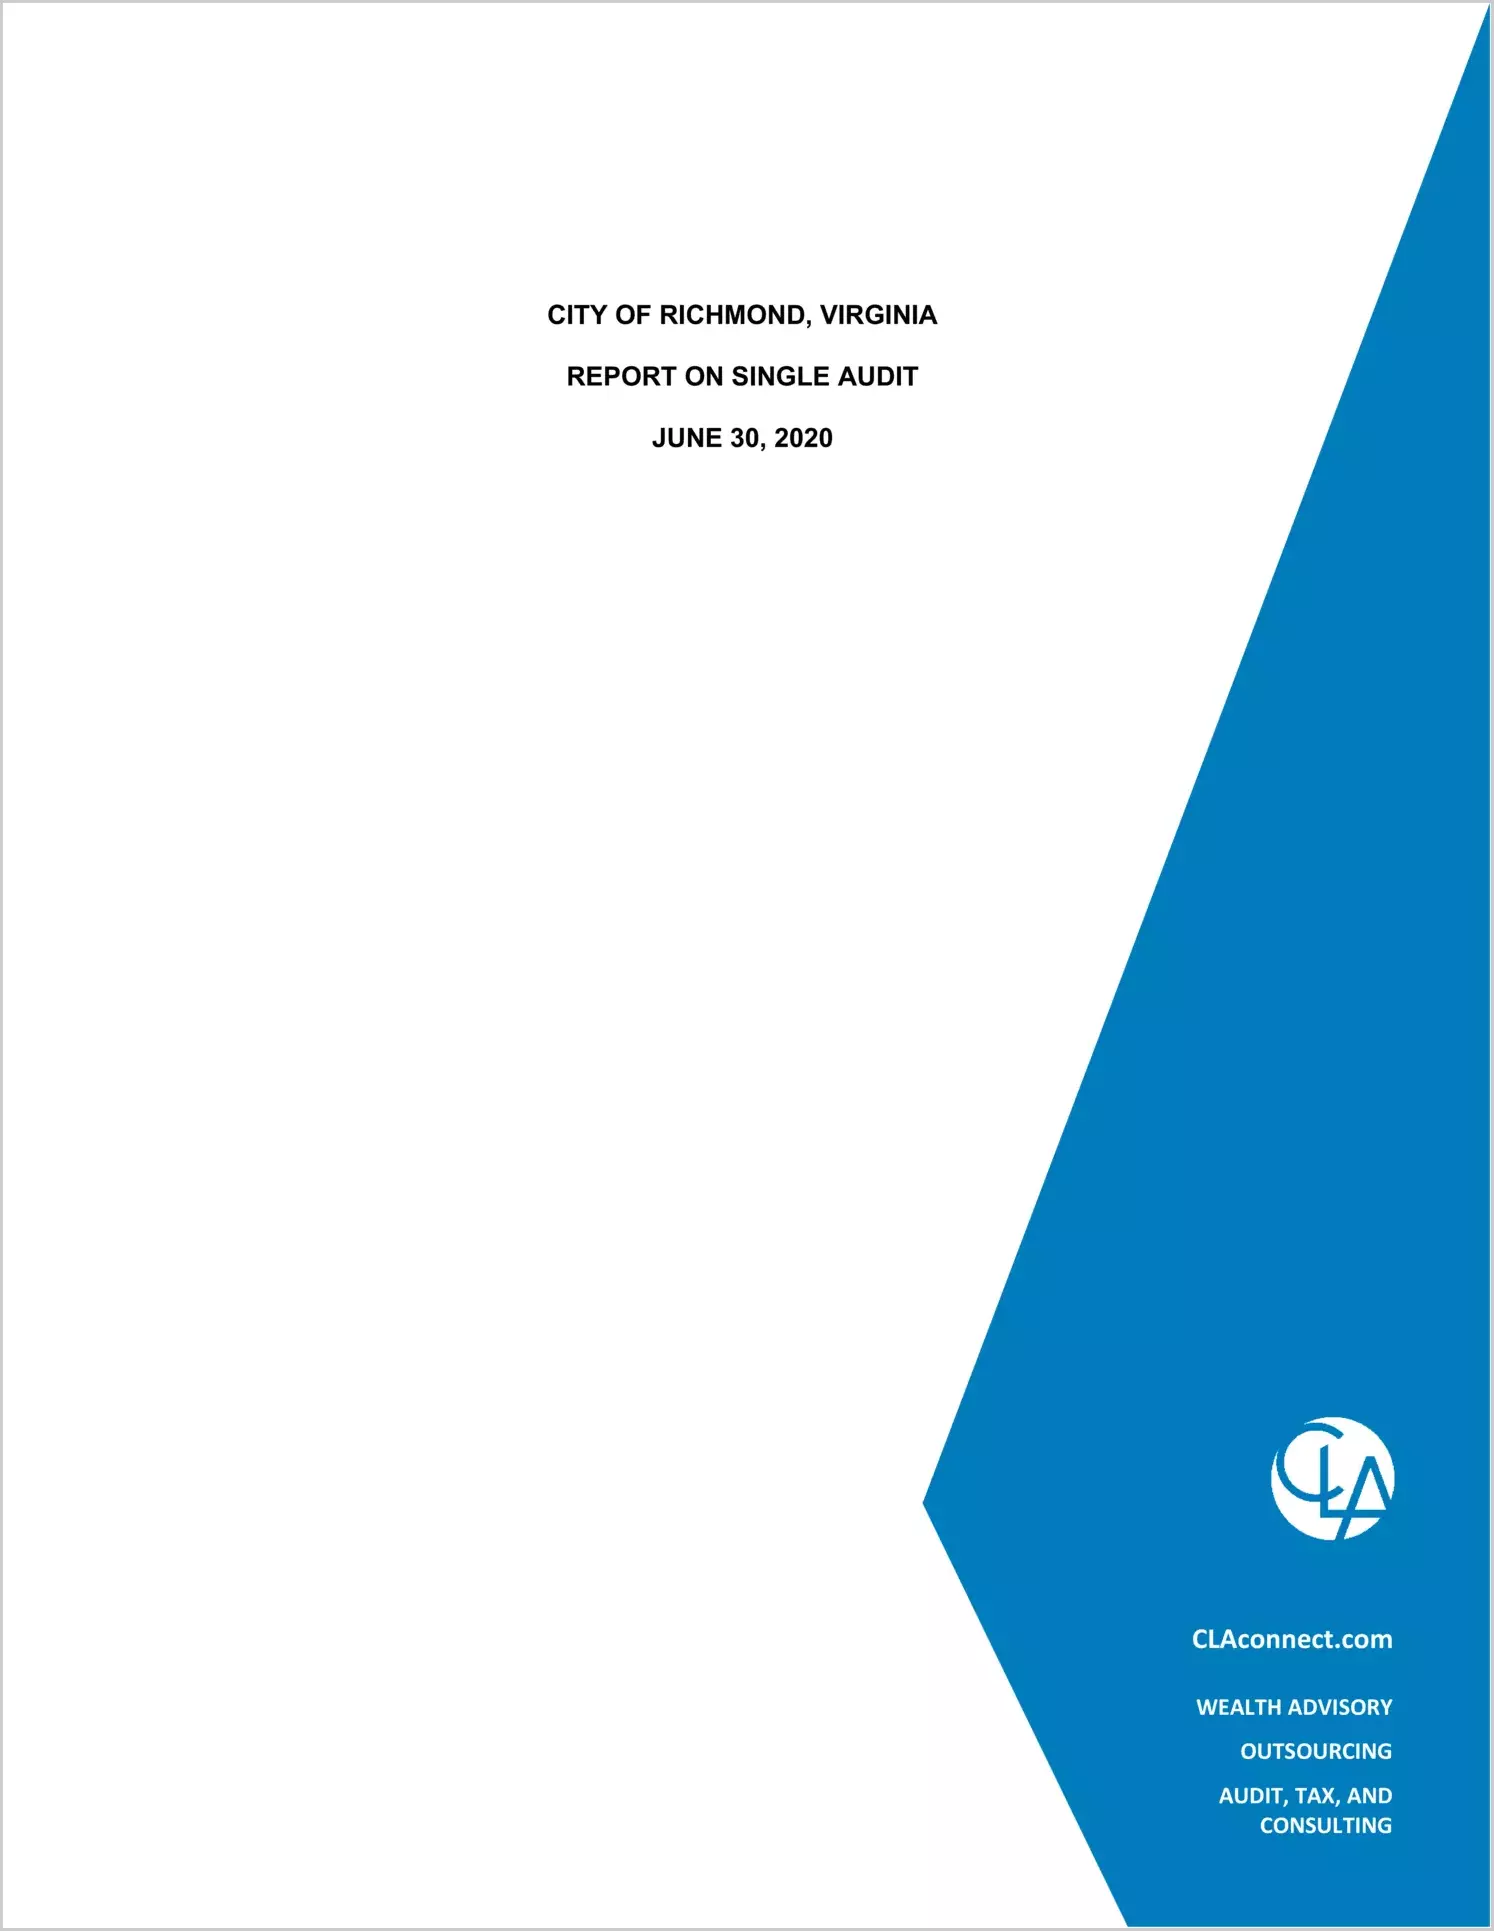 2020 Internal Control and Compliance Report for City of Richmond